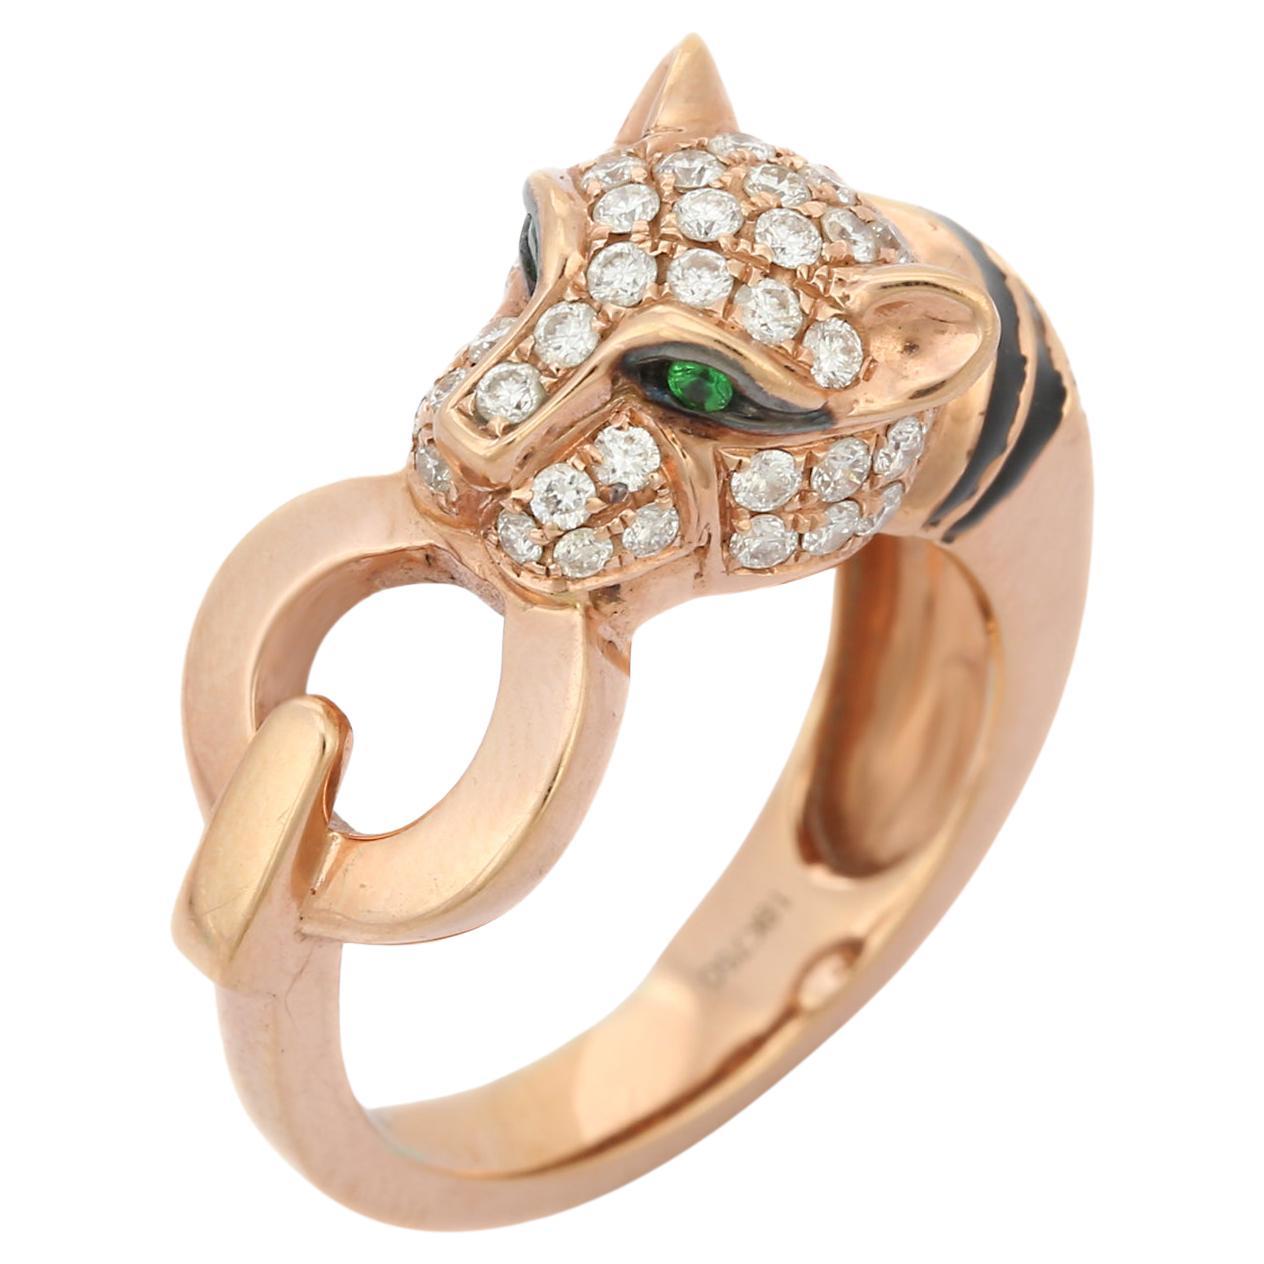 18K Rose Gold Iconic Panther Ring with Tsavorite and Diamond